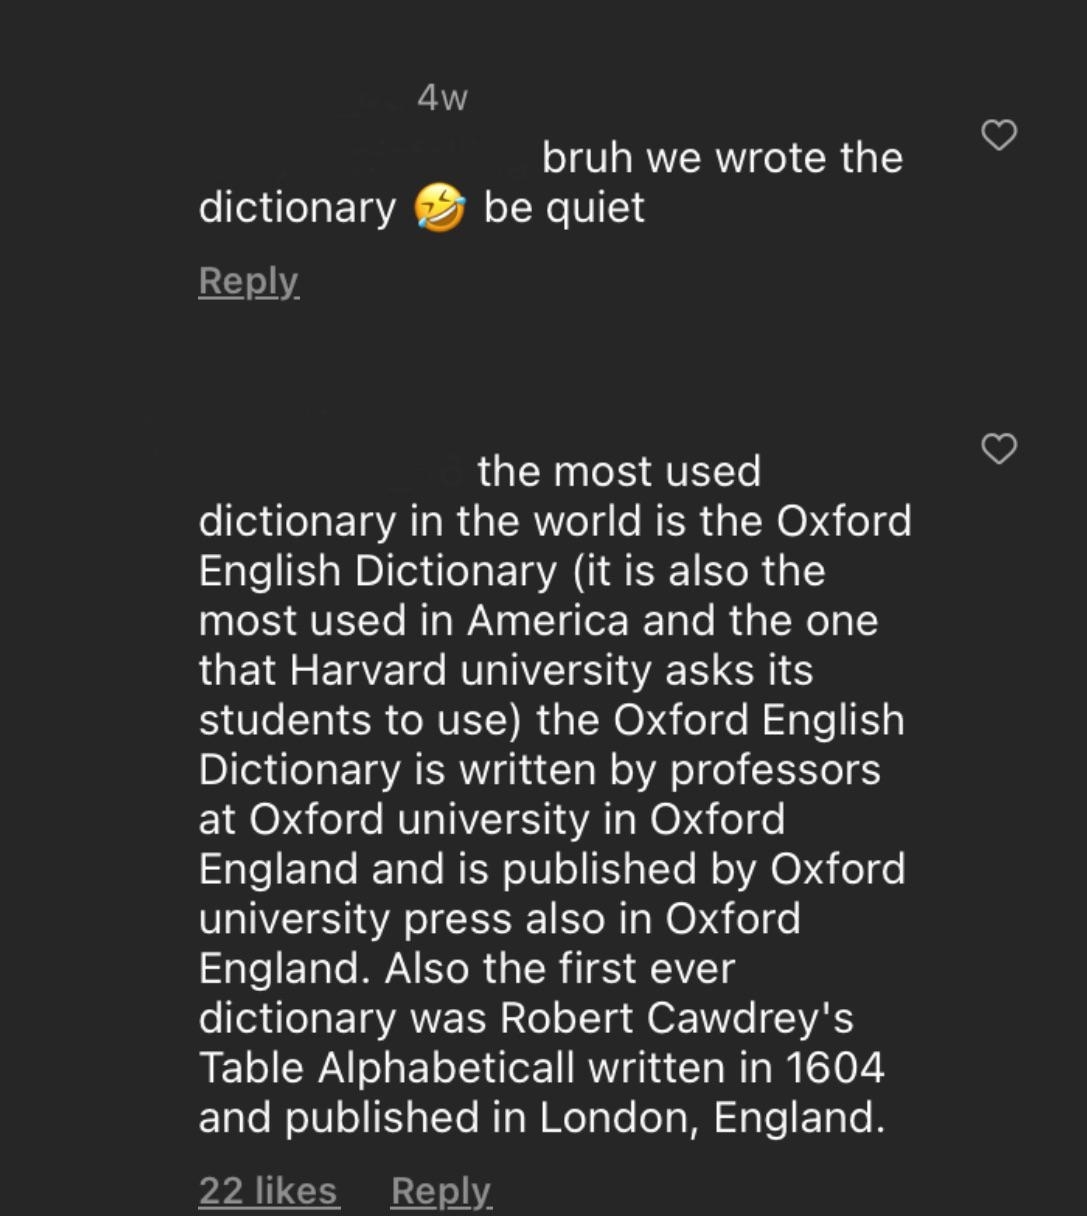 Comment thread on a post discussing the most used dictionaries, with someone mentioning the Oxford English Dictionary&#x27;s prominence and history